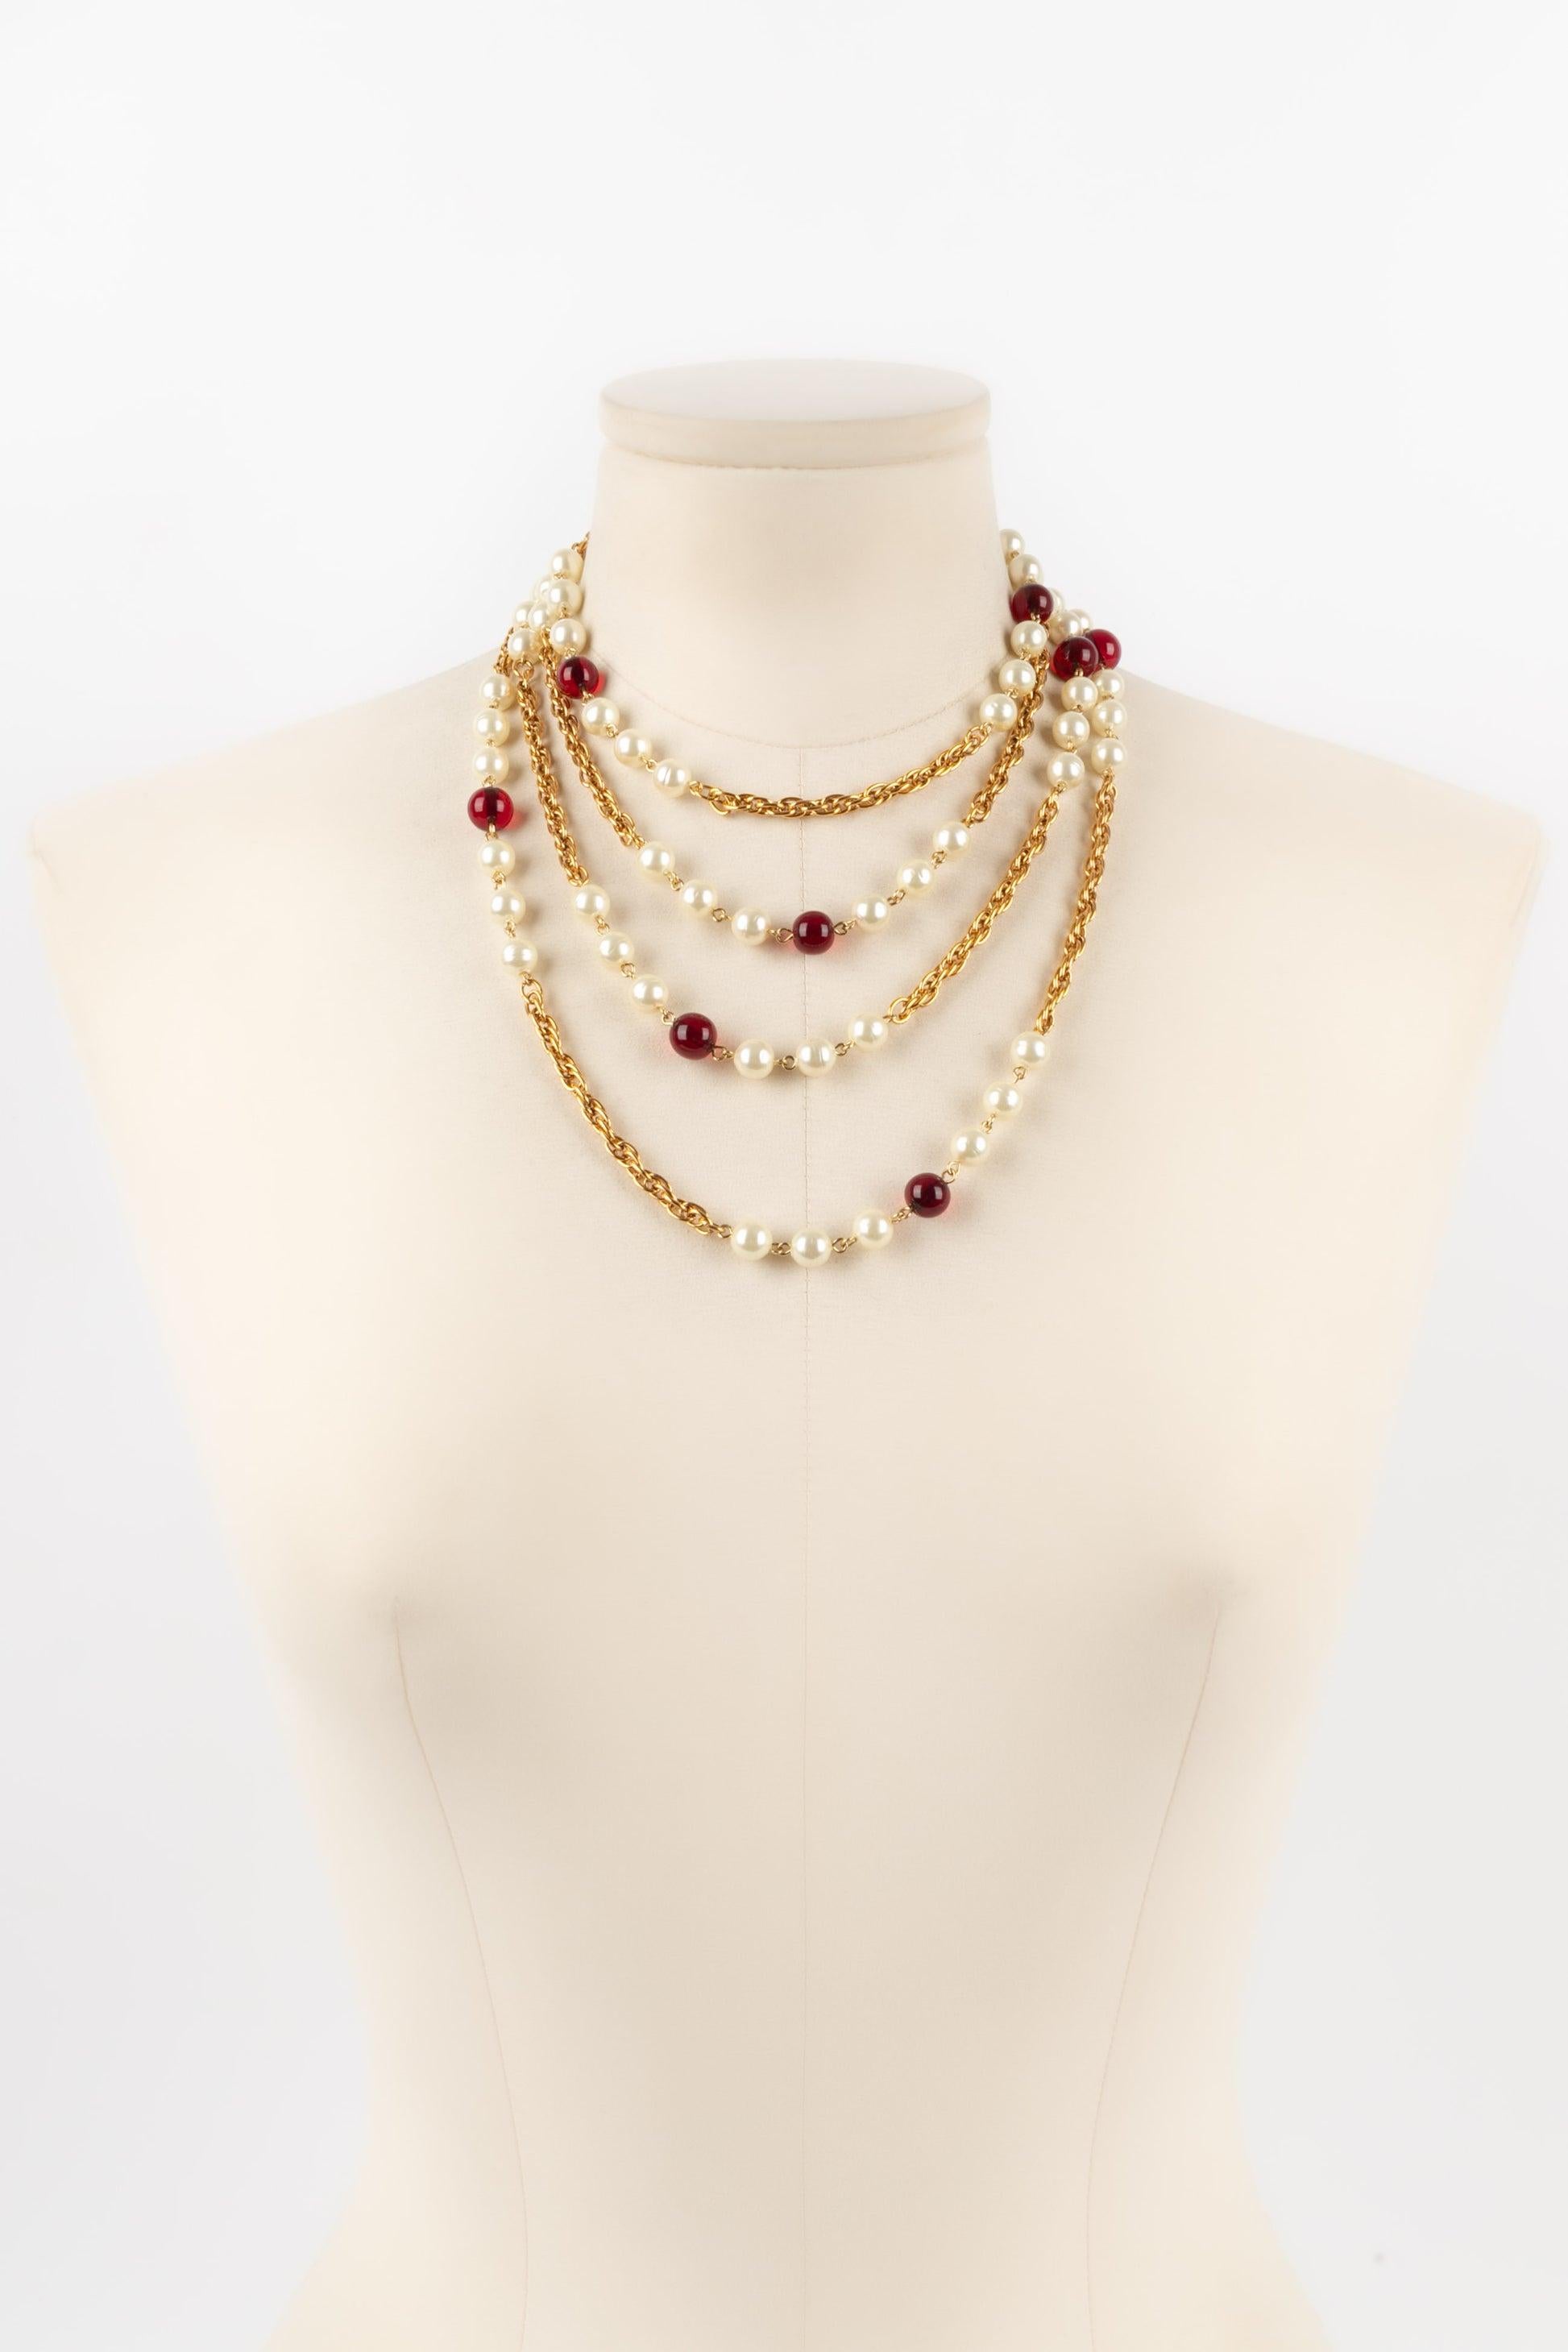 Chanel - (Made in France) Golden metal necklace/sautoir with costume pearls and red glass pearls. 1984 Collection.

Additional information:
Condition: Very good condition
Dimensions: Length: 184 cm

Seller Reference: CB223
